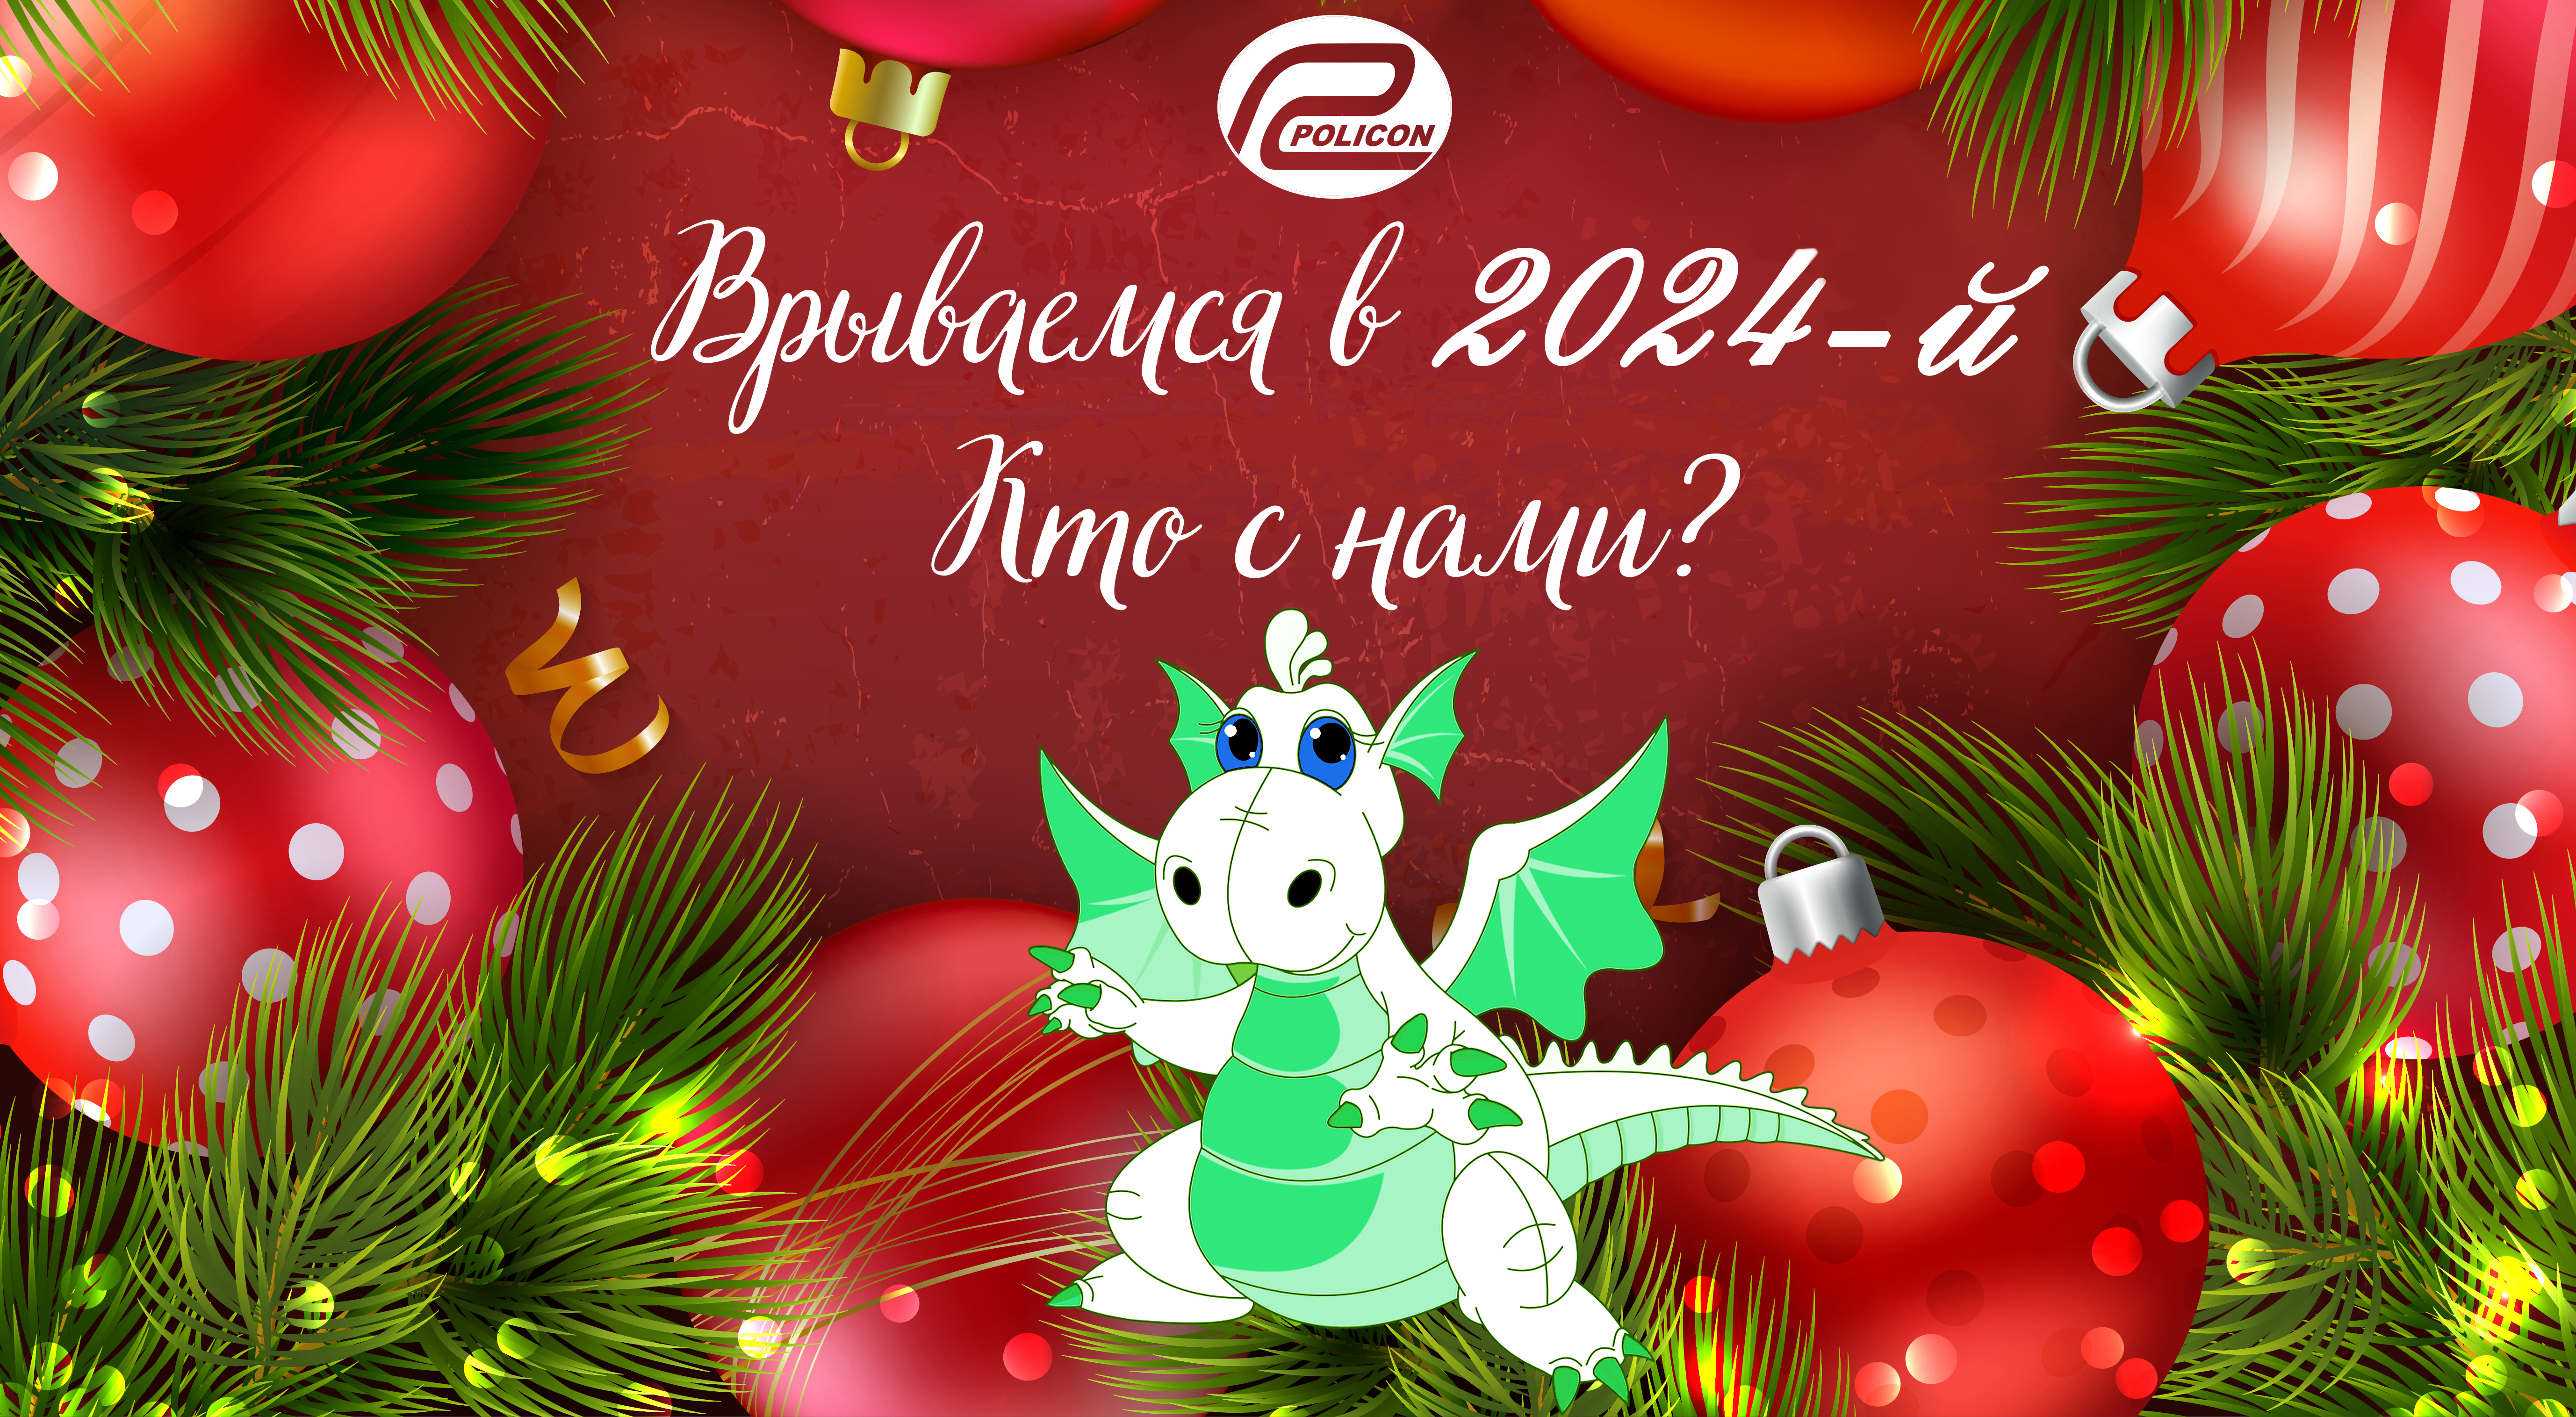 How did Poliсon JSCо celebrate the New Year?